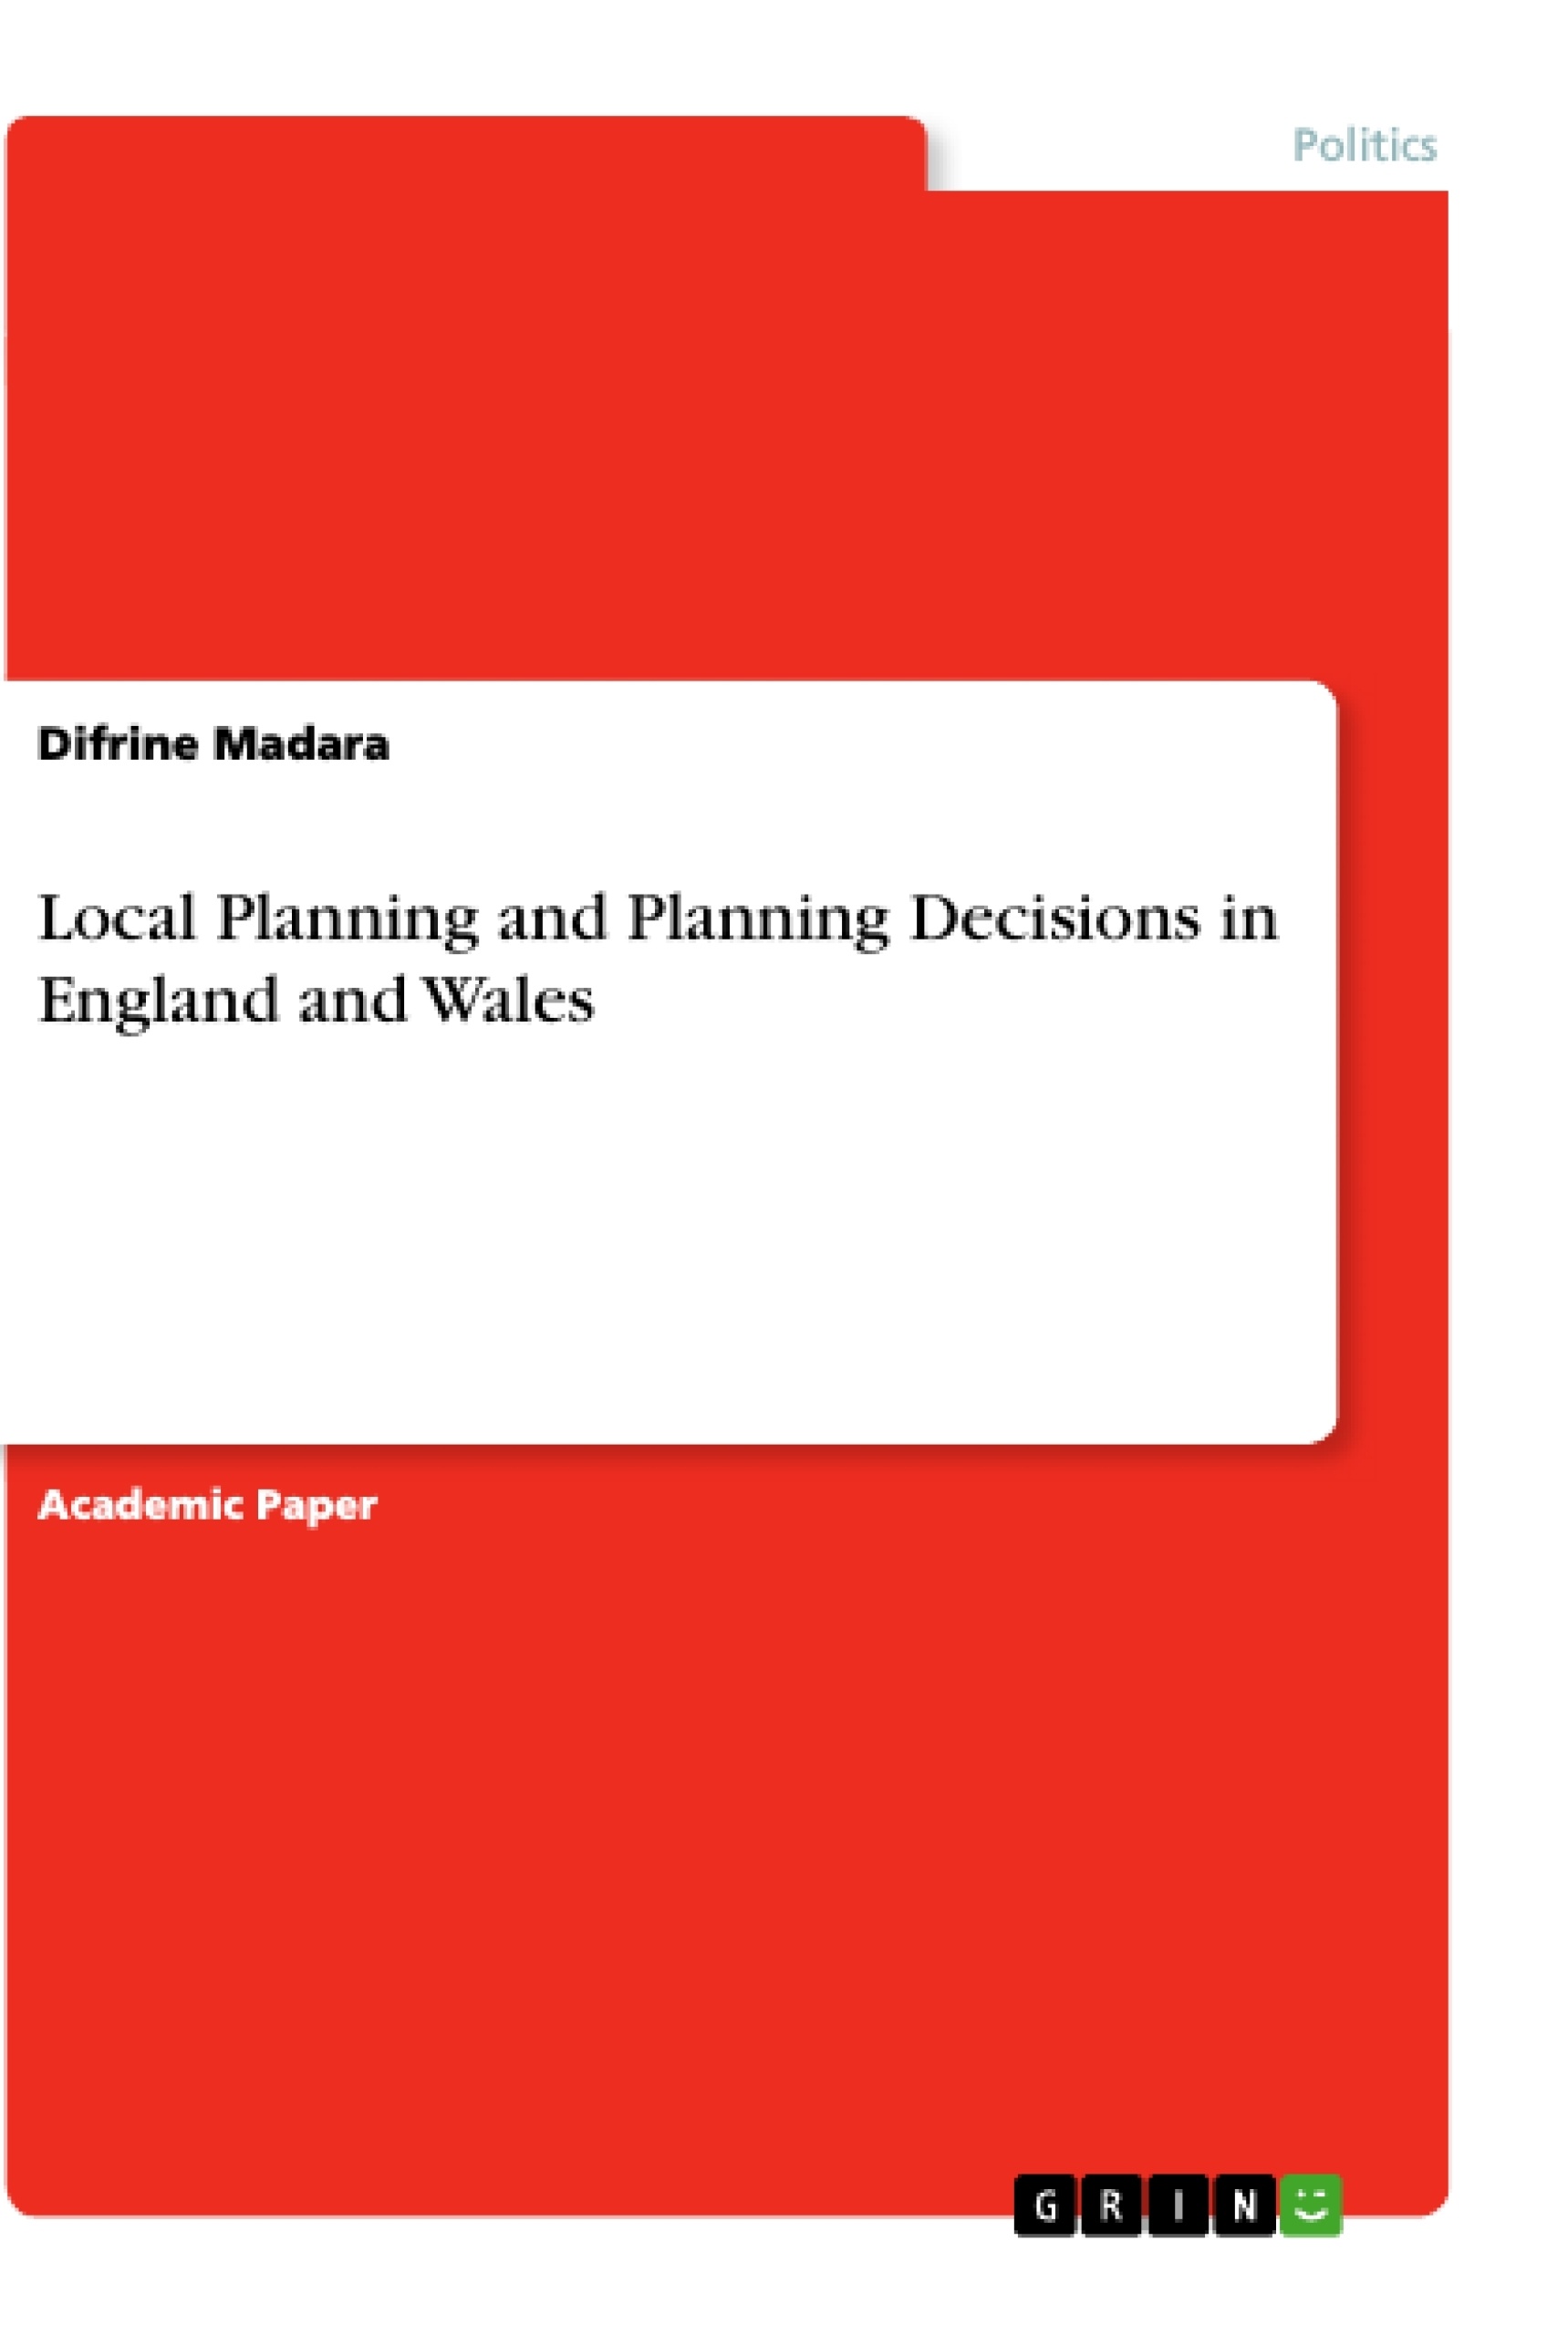 Title: Local Planning and Planning Decisions in England and Wales